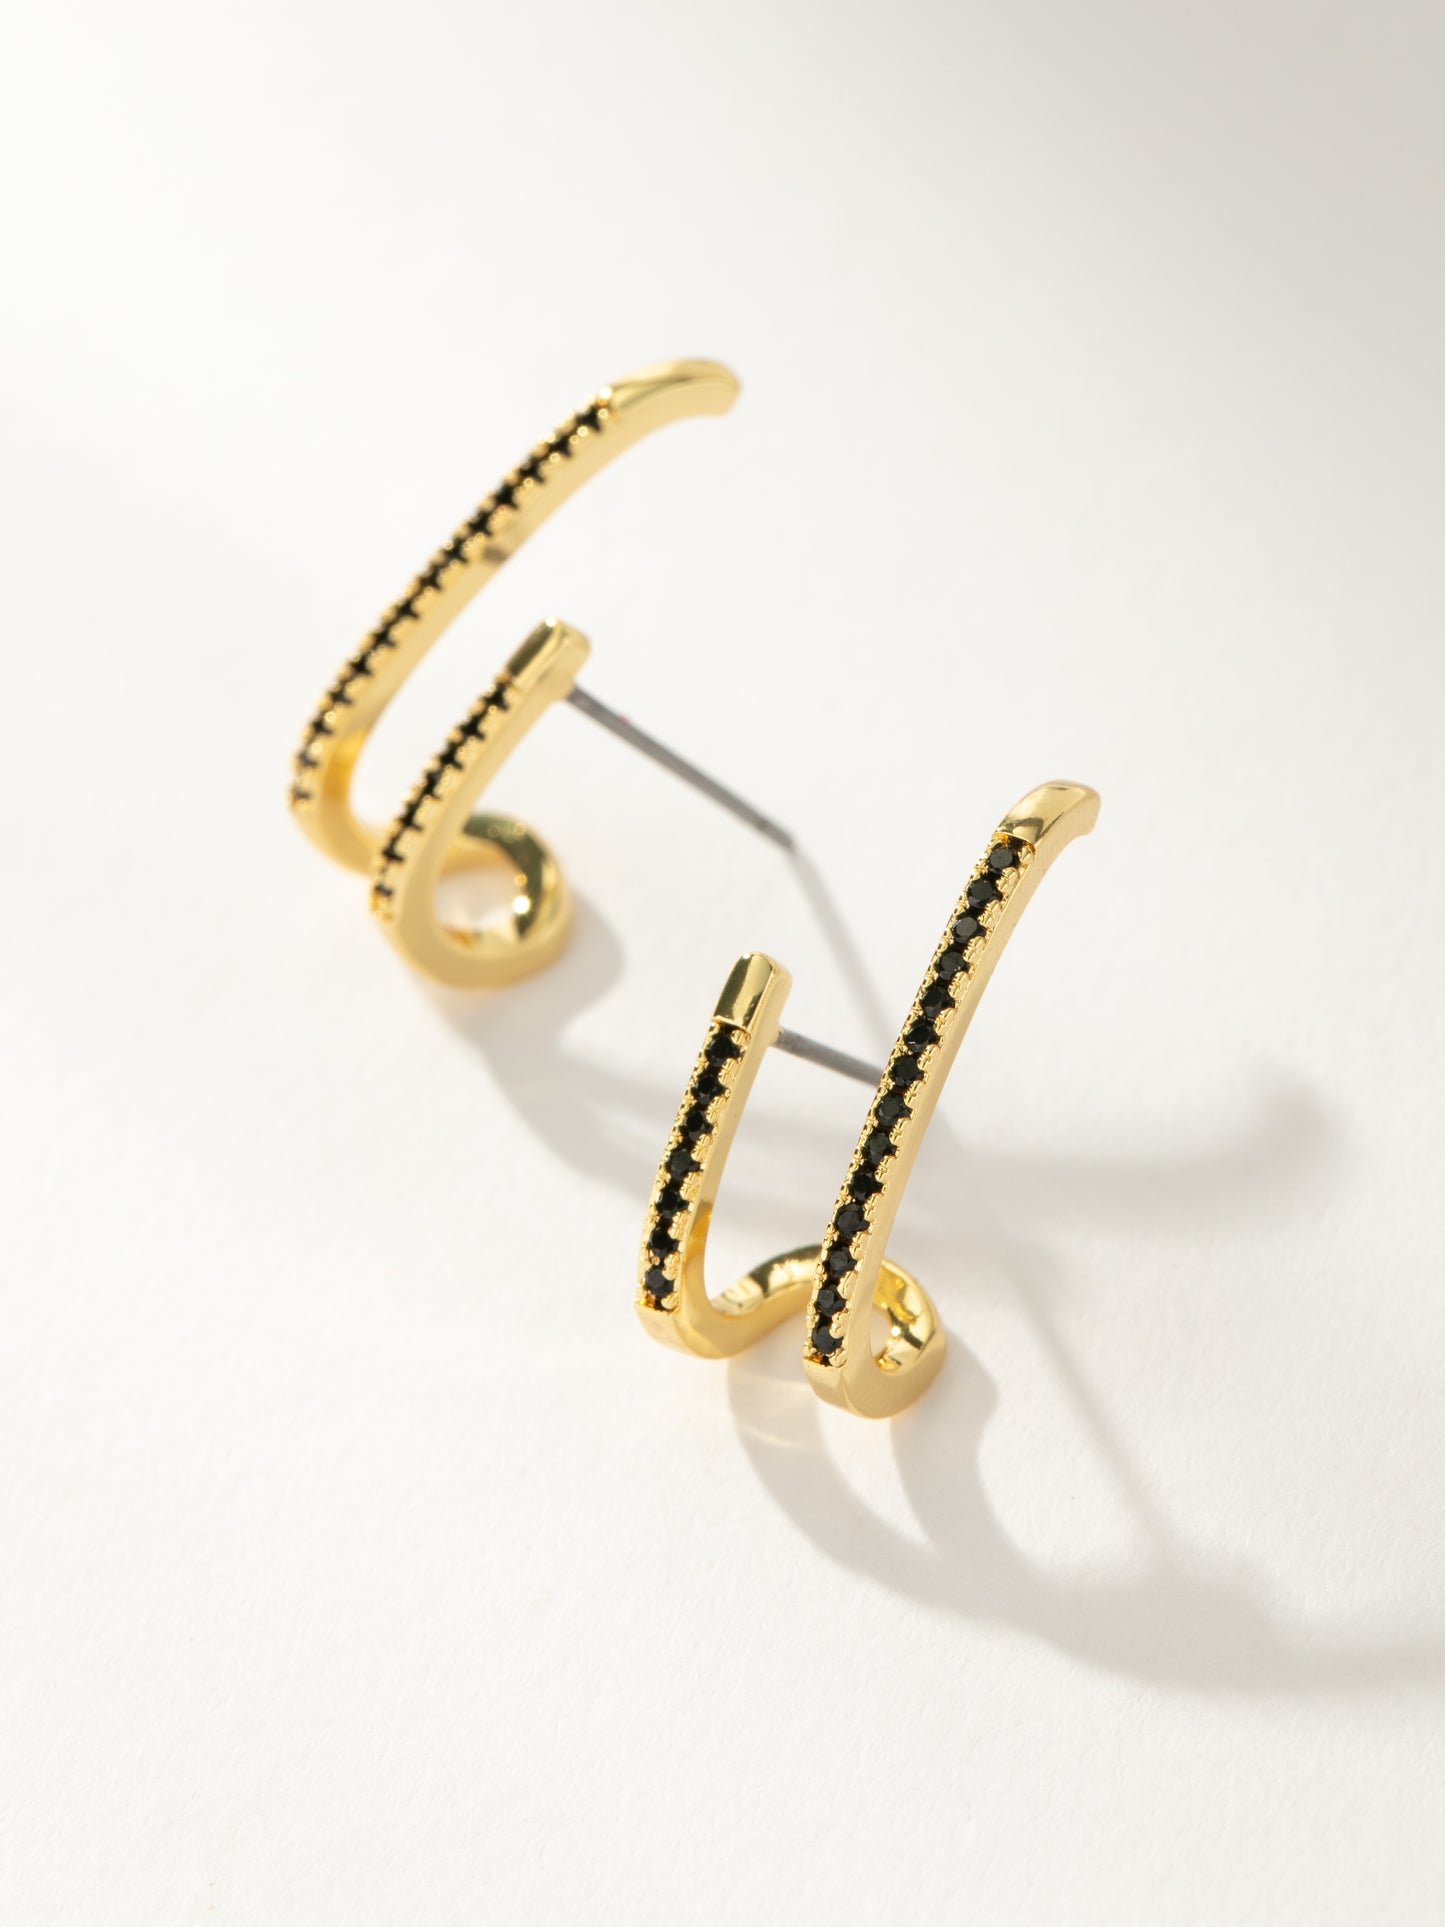 Double Vision Ear Climber | Gold Black | Product Image | Uncommon James